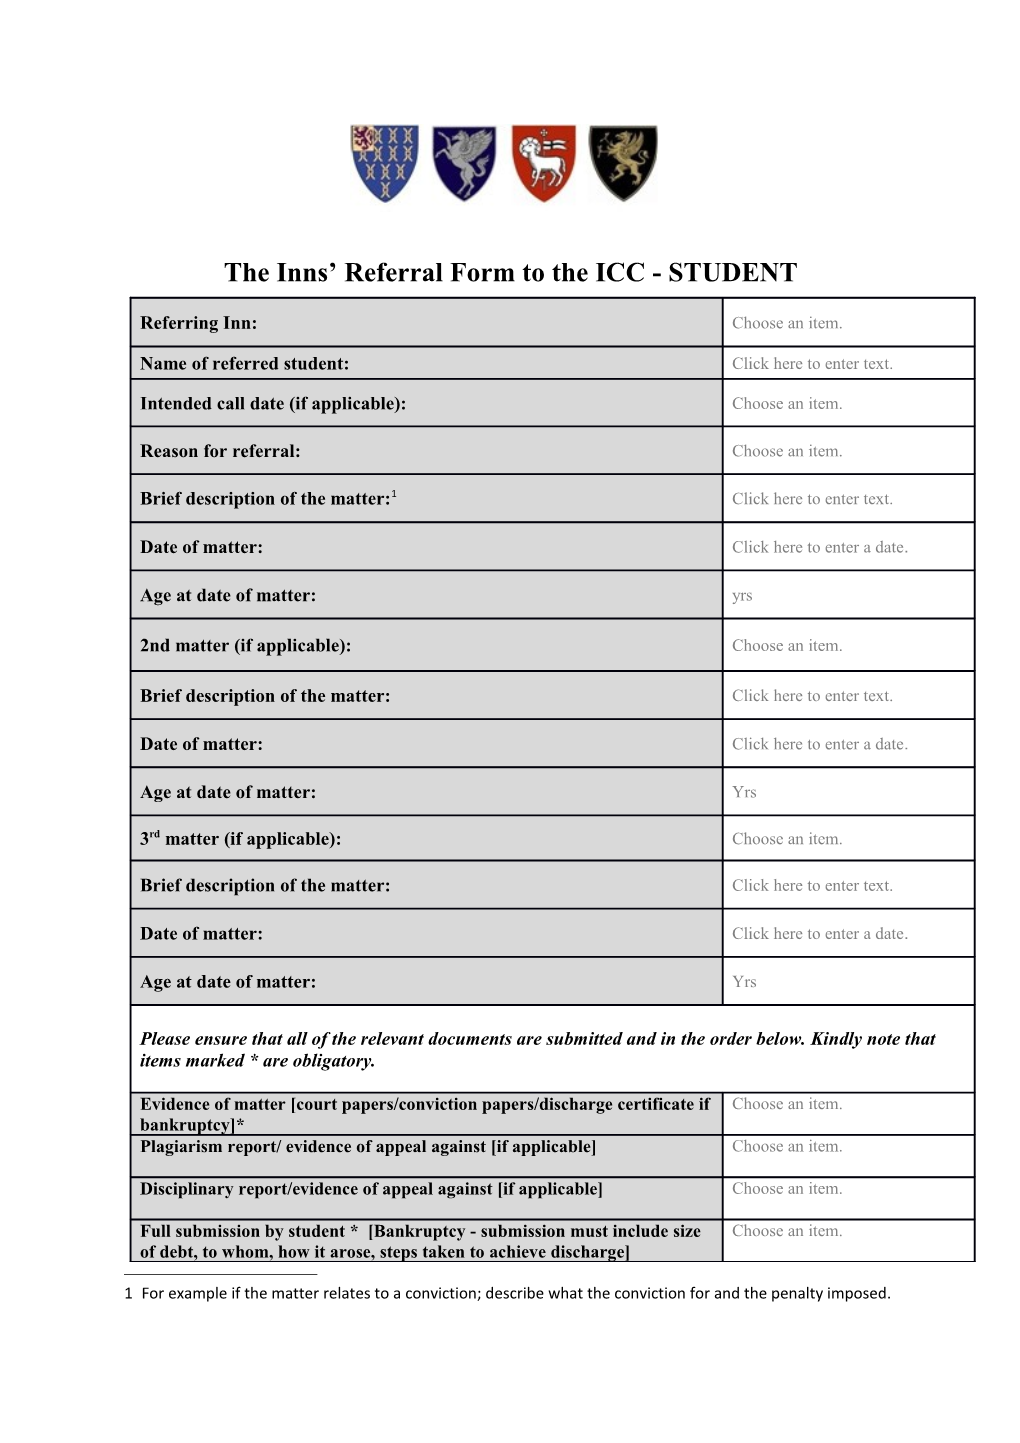 The Inns Referral Form to the ICC - STUDENT